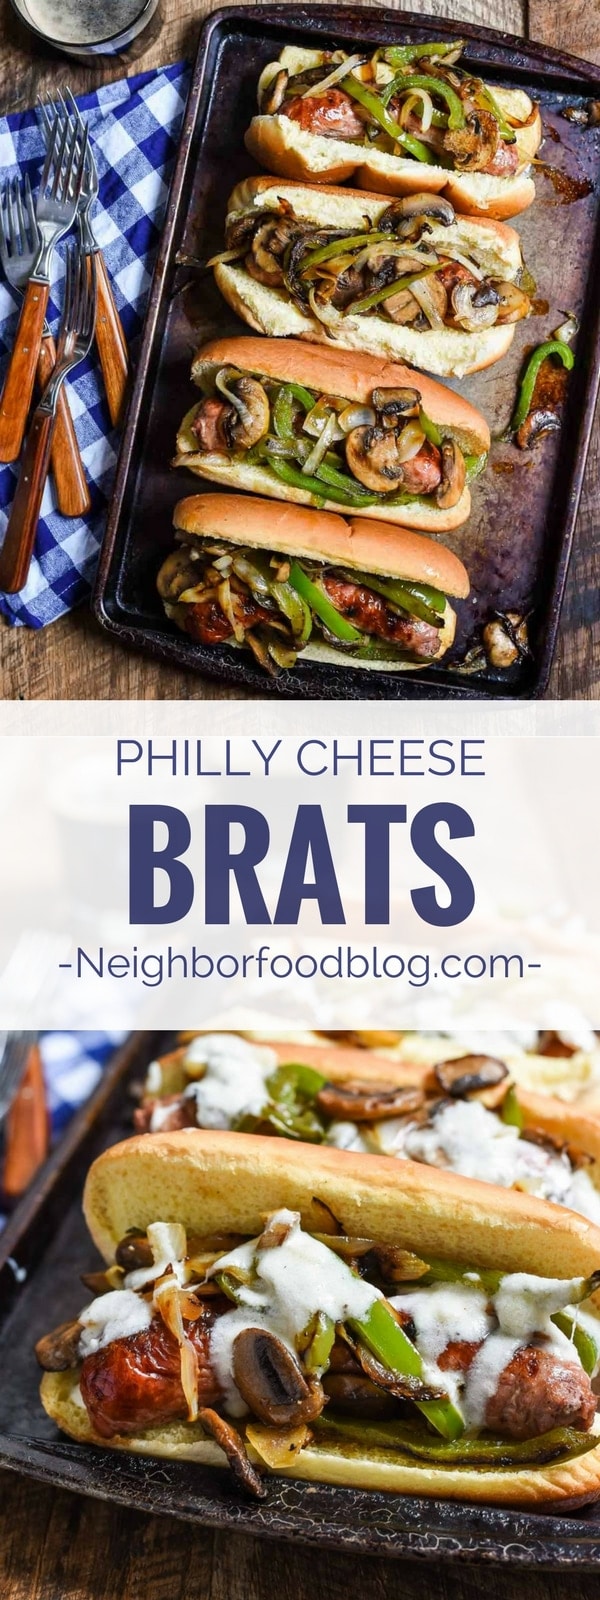 Philly Cheese Brats are loaded with green peppers, mushrooms, onions, and a smoky cheese sauce. The perfect grilled summer meal!